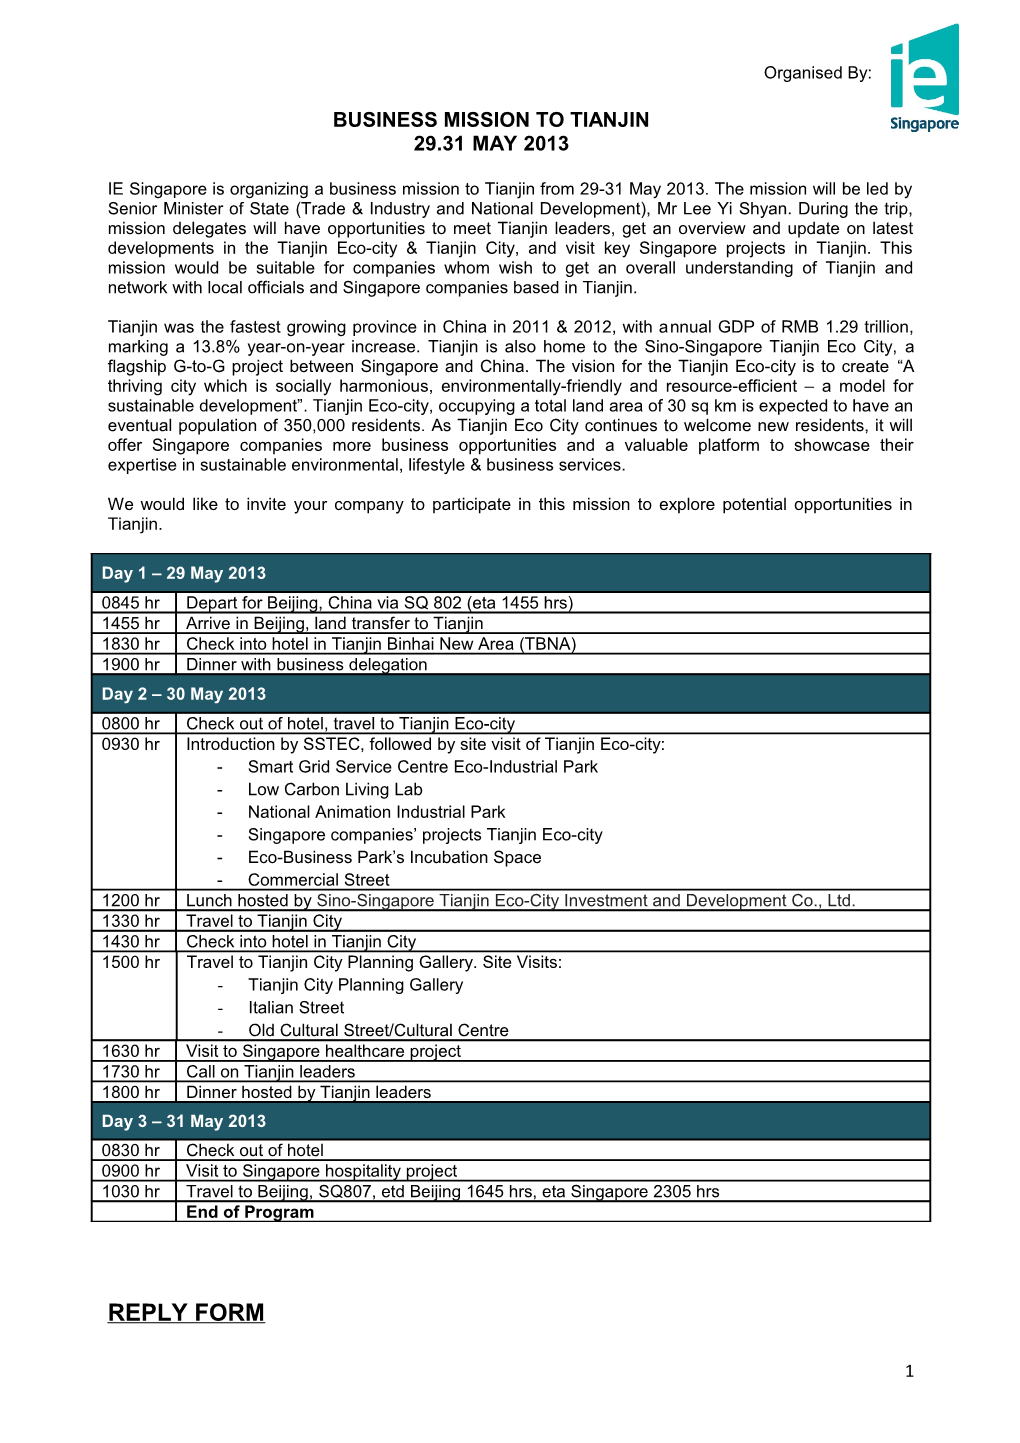 Proposed Program for Second Singapore-Tianjin Economic & Trade Council Meeting Cum Business